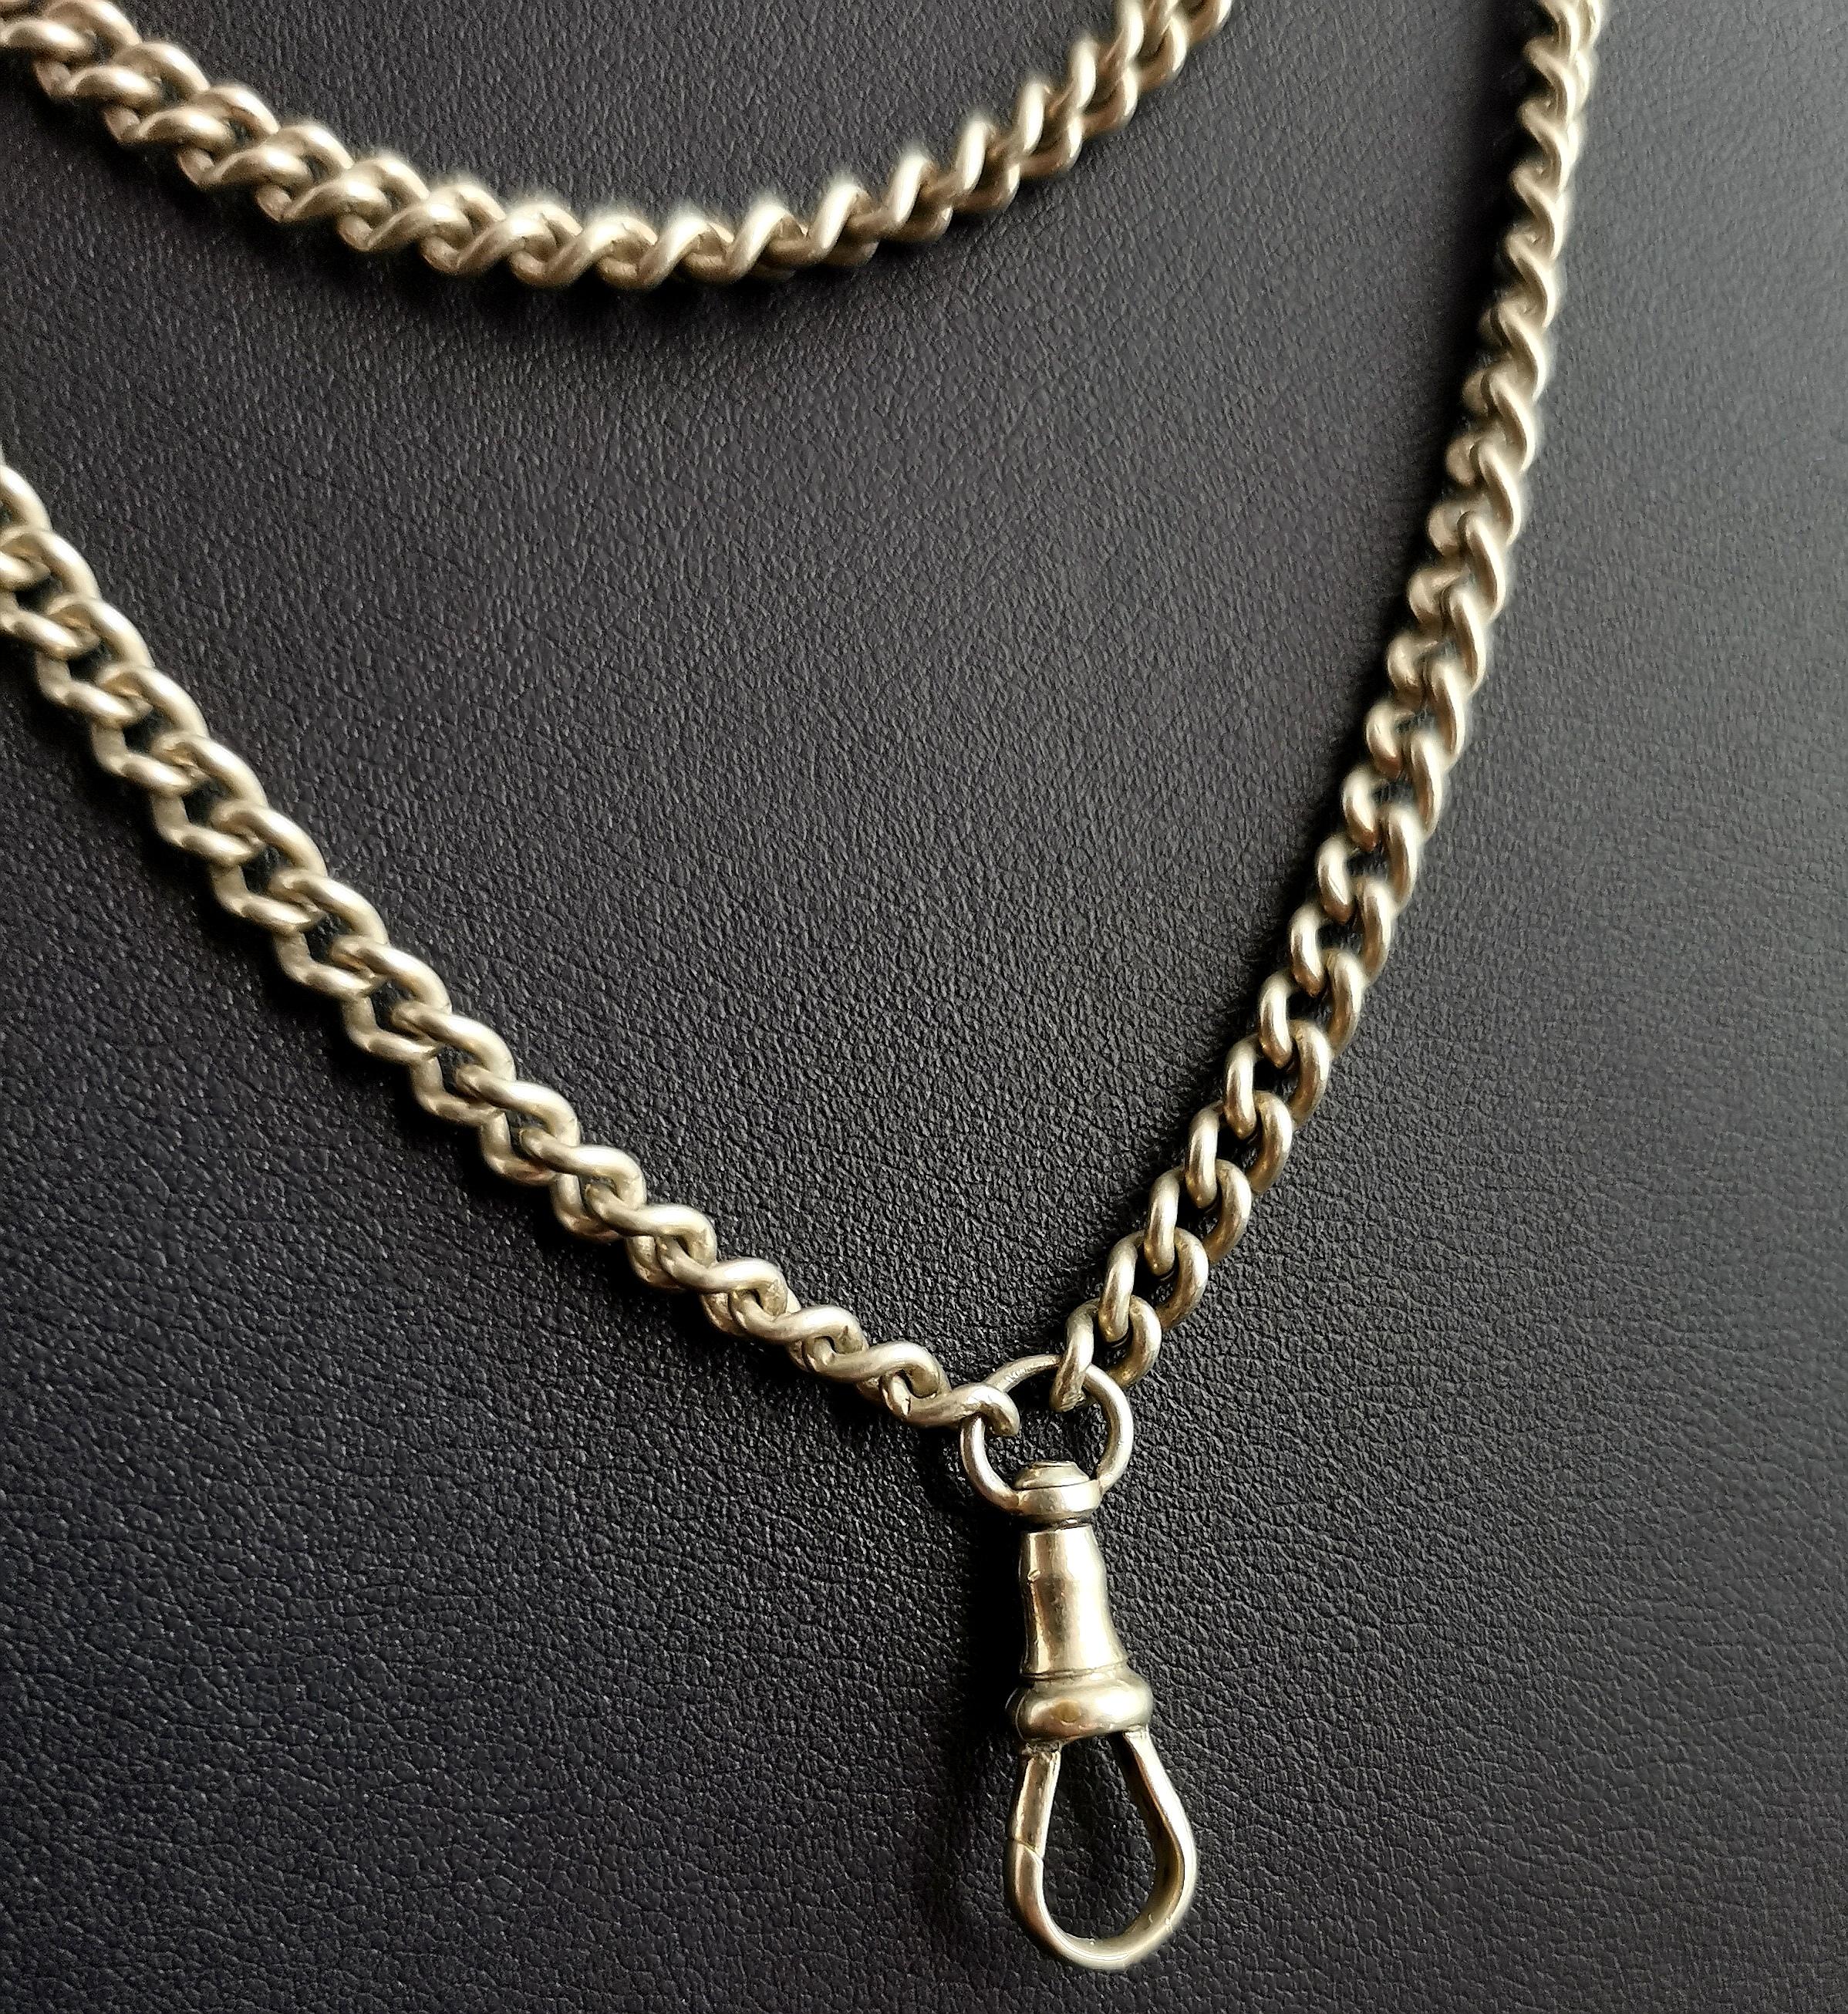 Antique Victorian Silver Plated Longuard Chain Necklace, Muff Chain 3